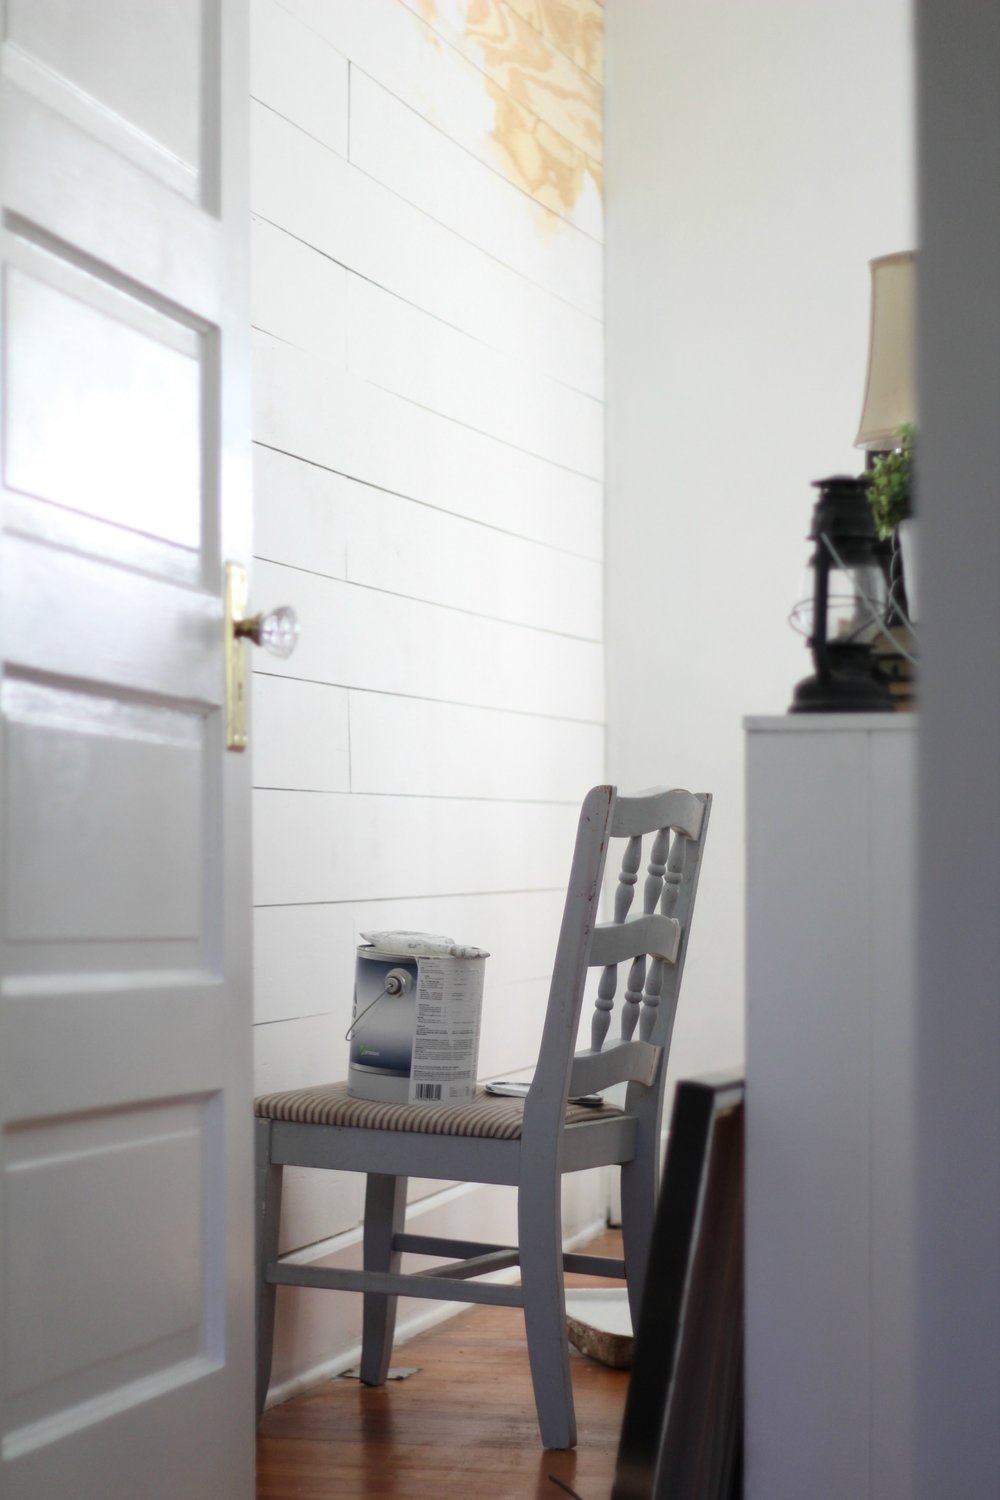 paint on a chair that is being painted onto a DIY Shiplap wall.